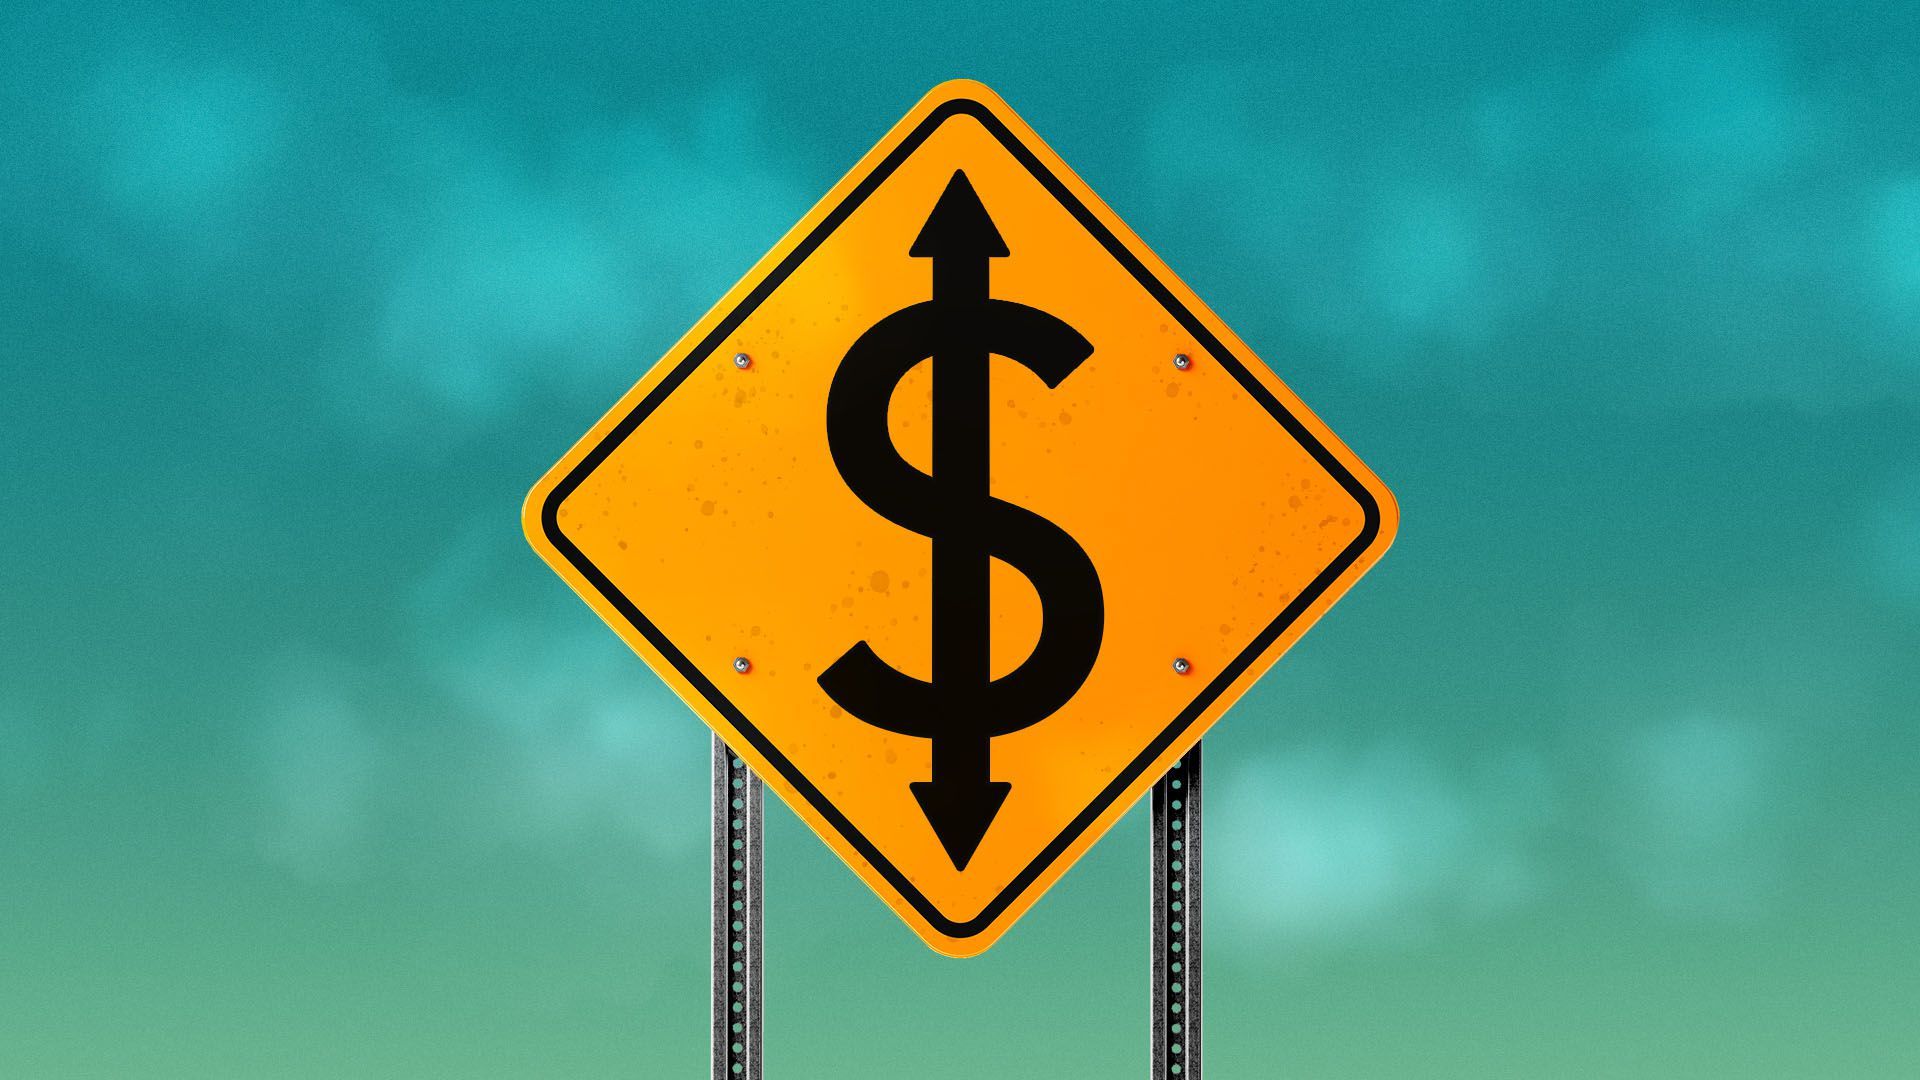 Illustration of a street sign with a dollar symbol with two arrows on it.